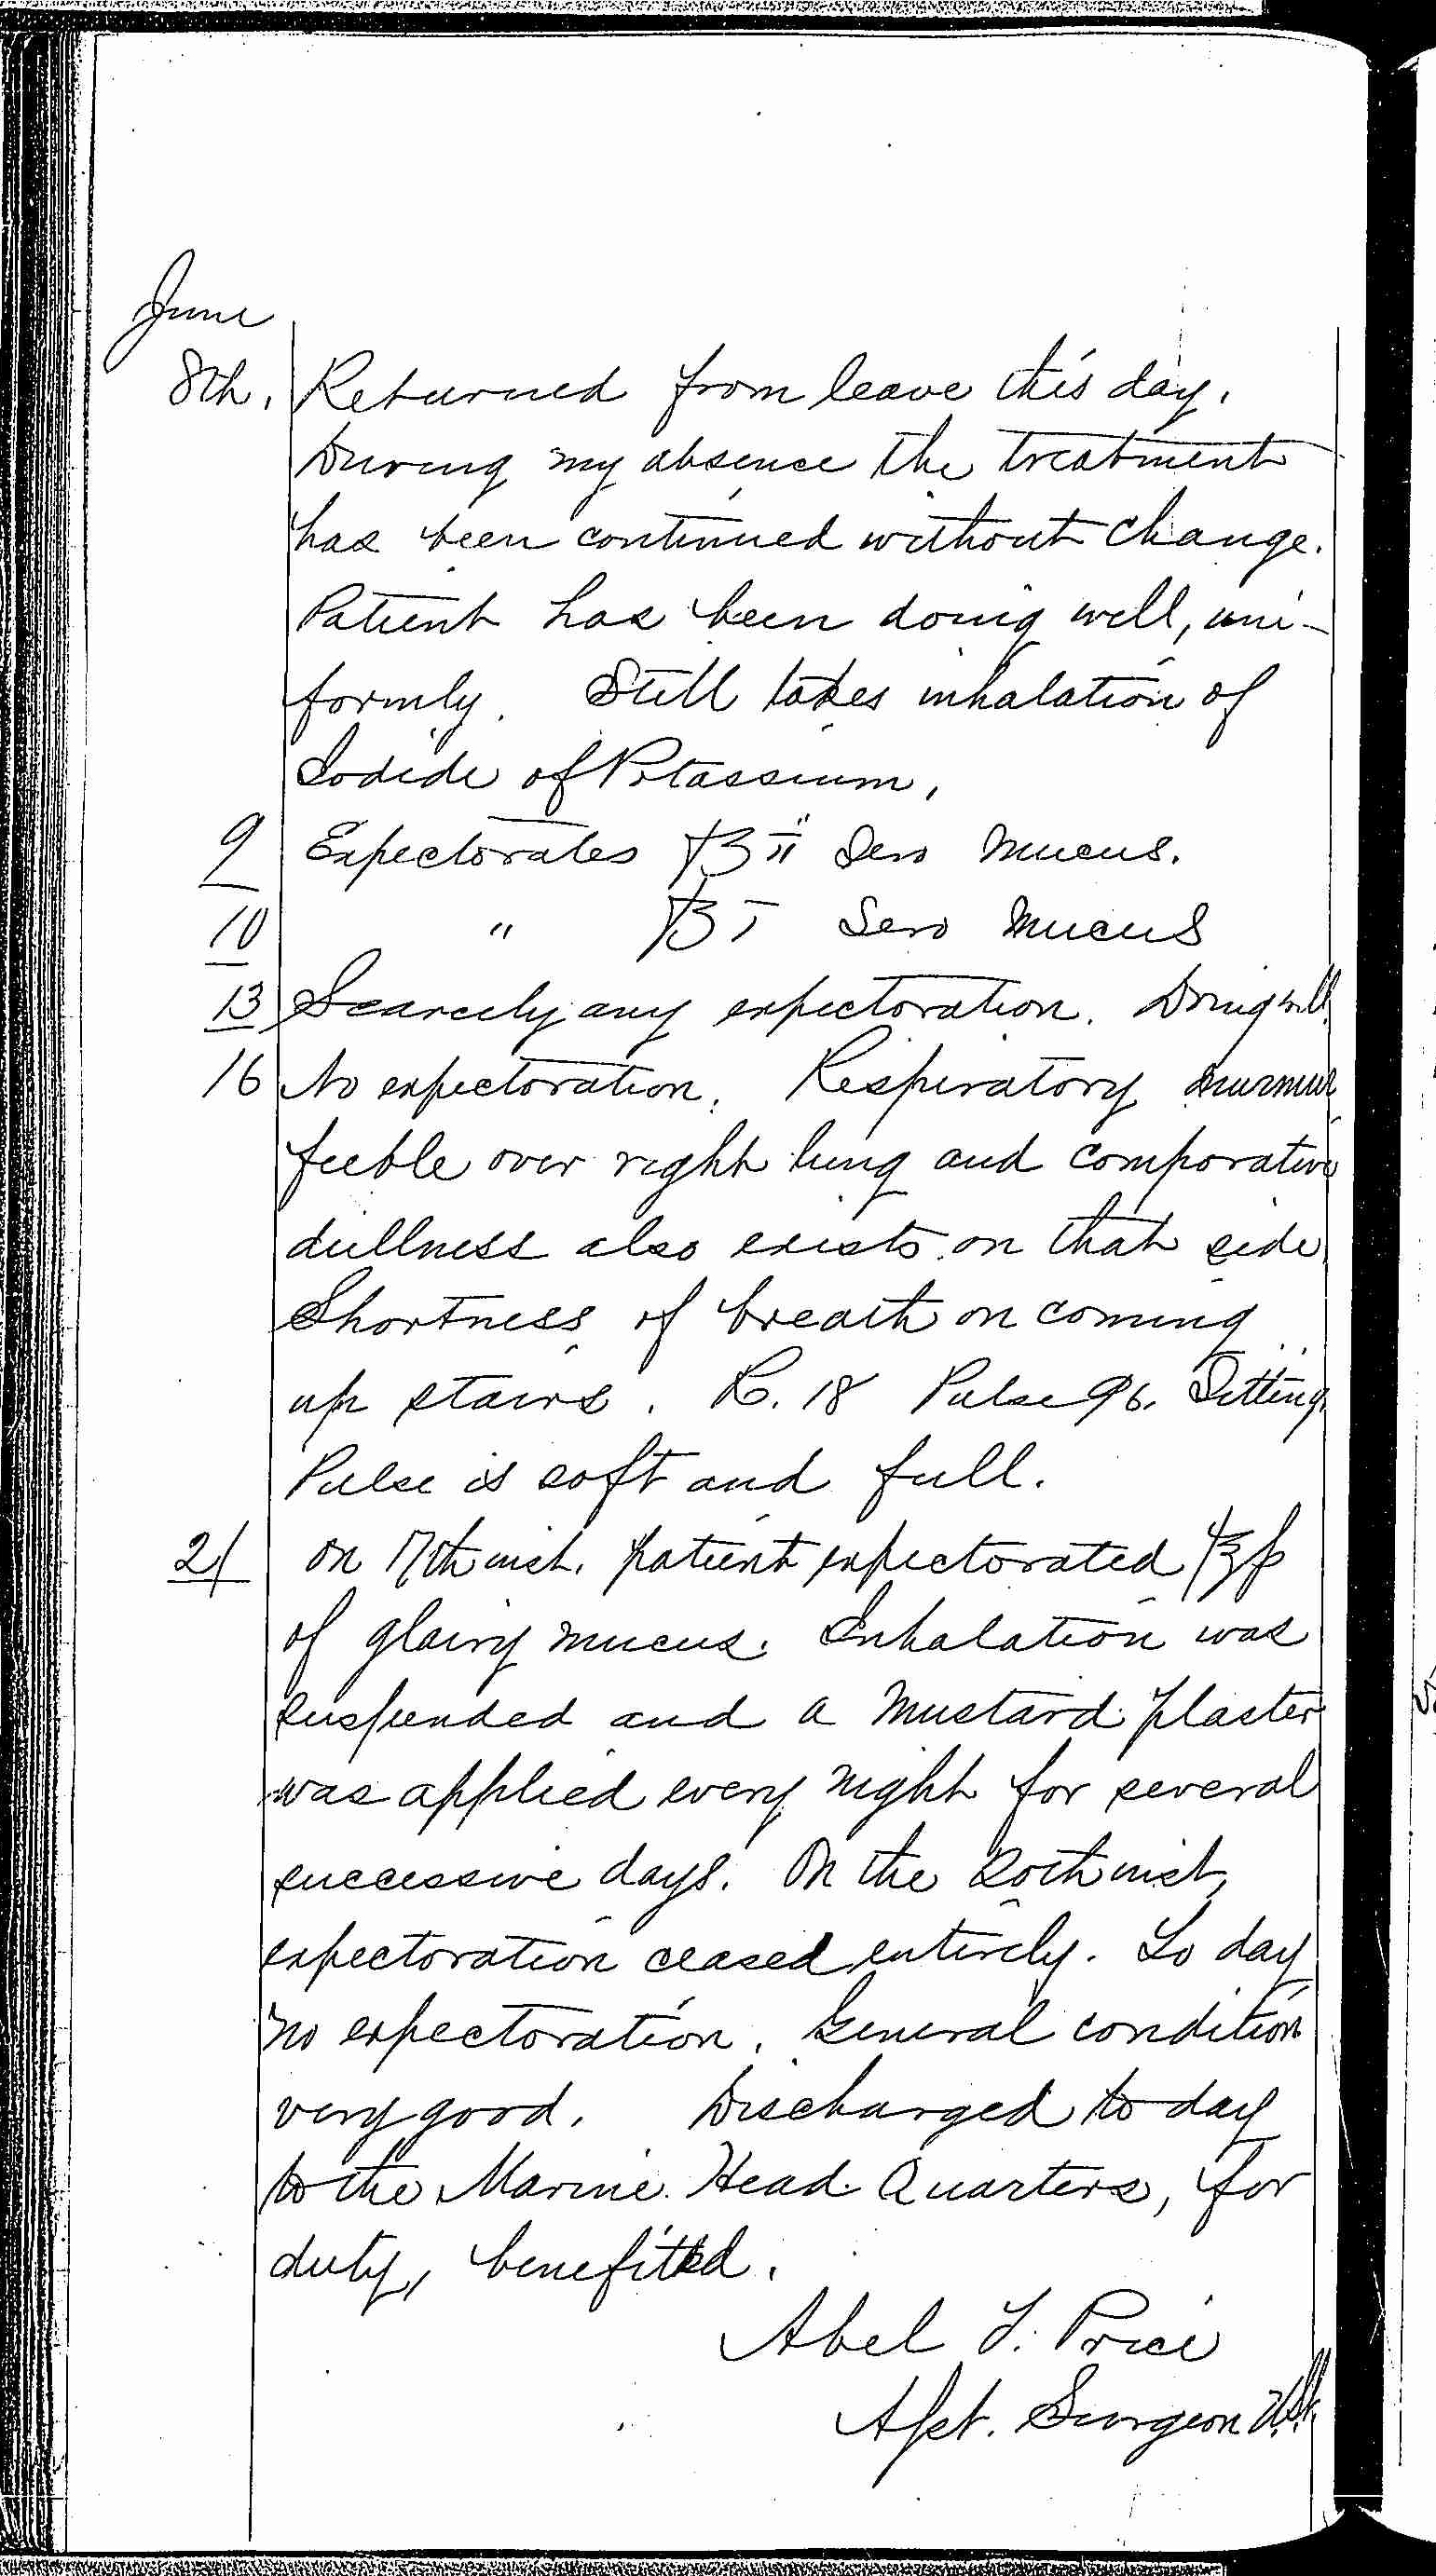 Entry for Peter C. Cheeks (page 16 of 16) in the log Hospital Tickets and Case Papers - Naval Hospital - Washington, D.C. - 1868-69